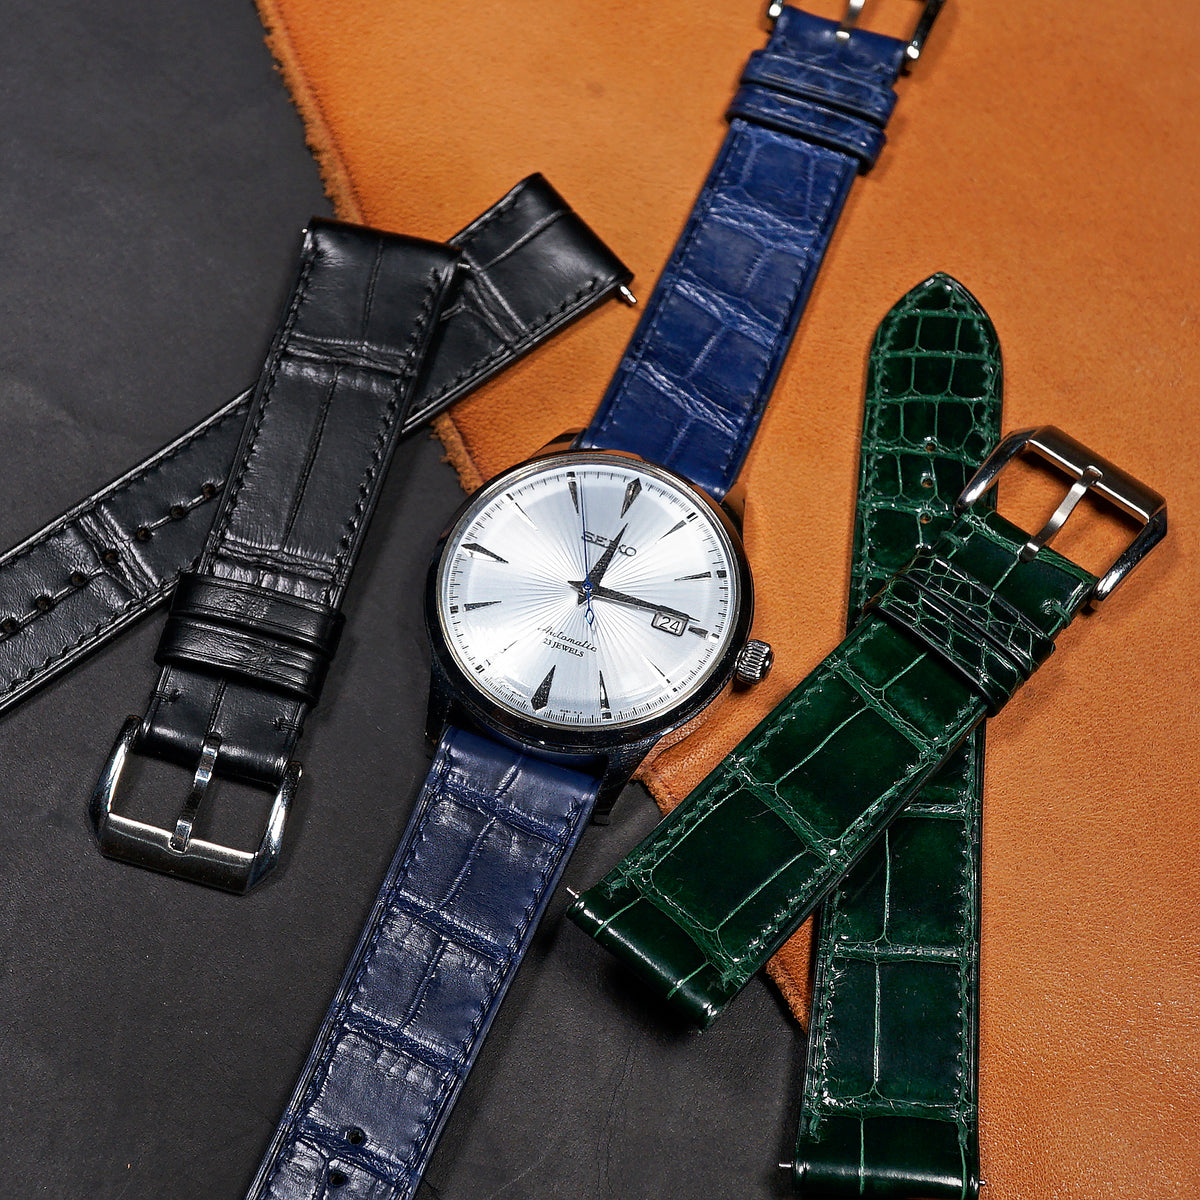 Crocodile Leather Watch Strap in Blue (Glossy) - Nomad Watch Works MY